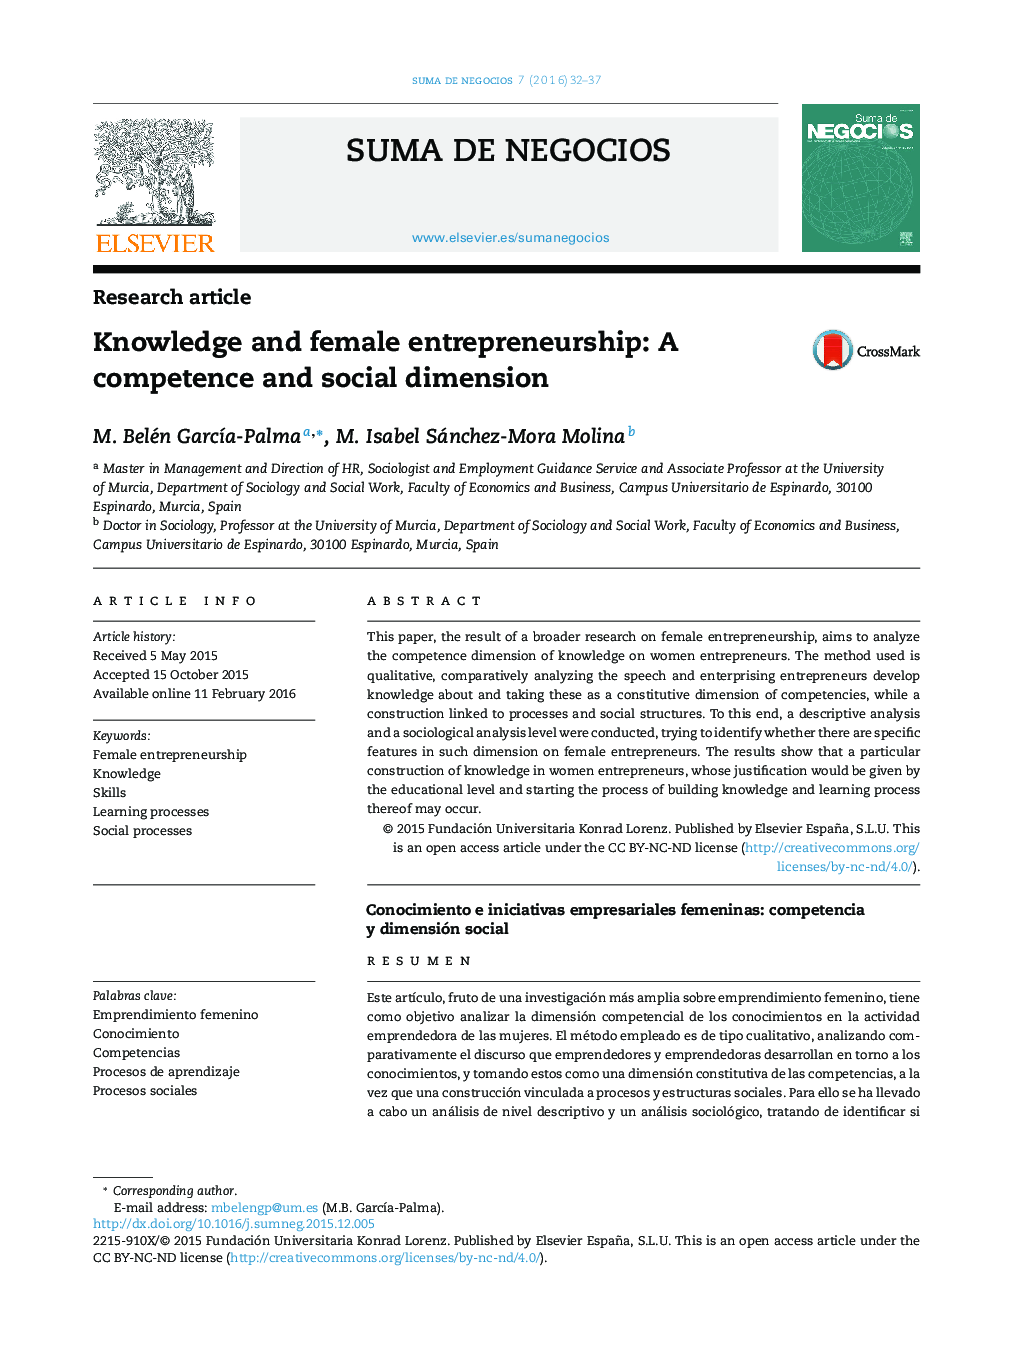 Knowledge and female entrepreneurship: A competence and social dimension